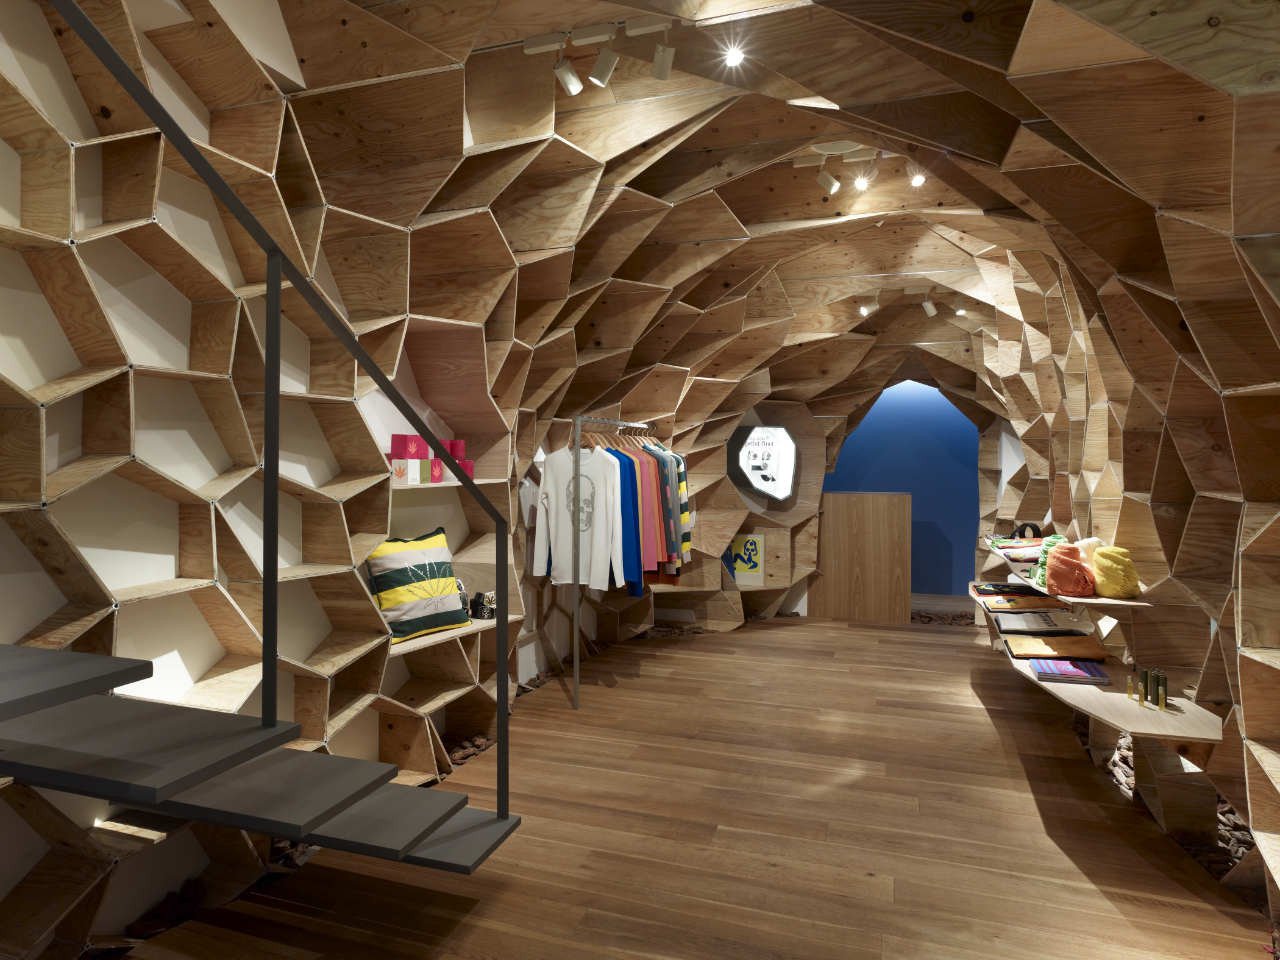 Innovative Design Ideas for Retail Store: The Lucien Pellat-Finet